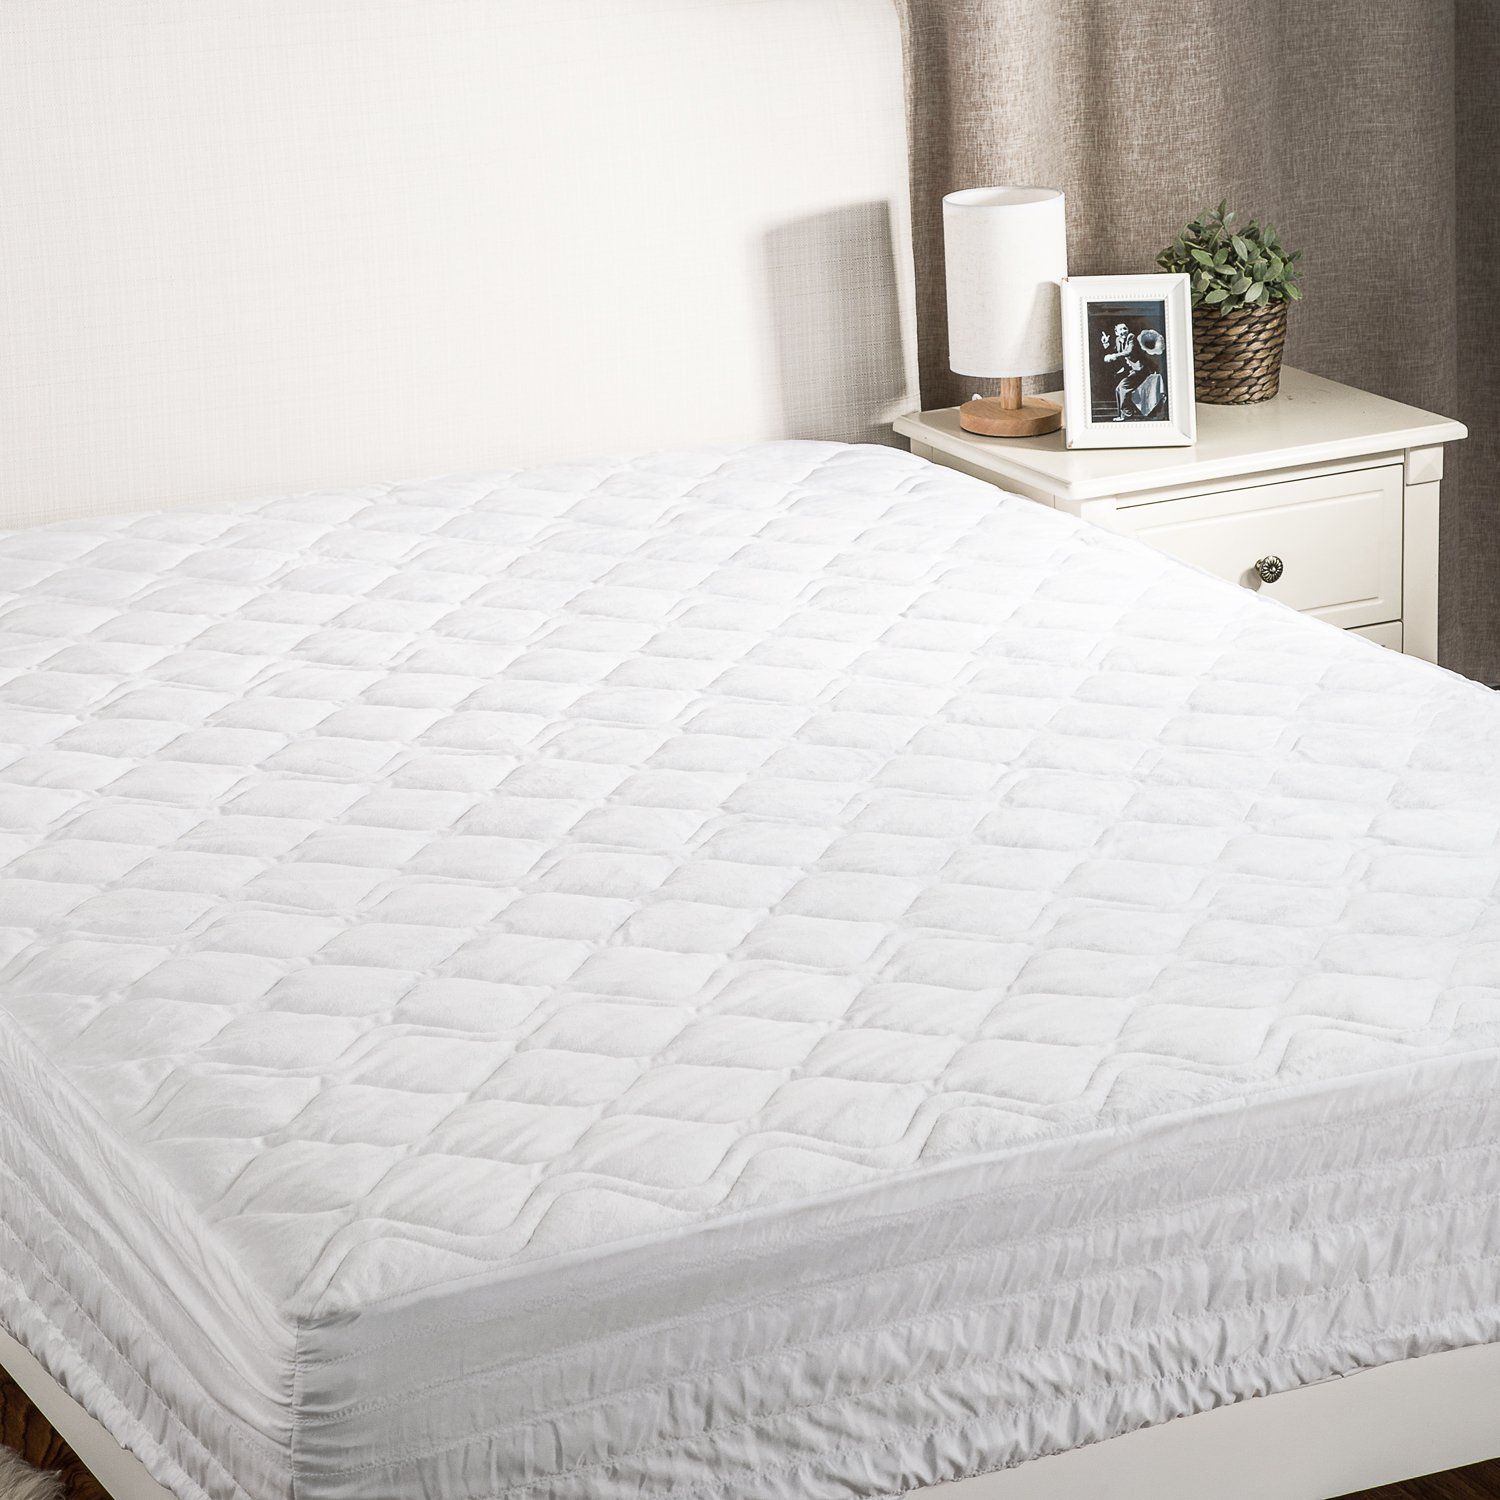 Mattress Pad King Size Sale  Ease Bedding with Style ...